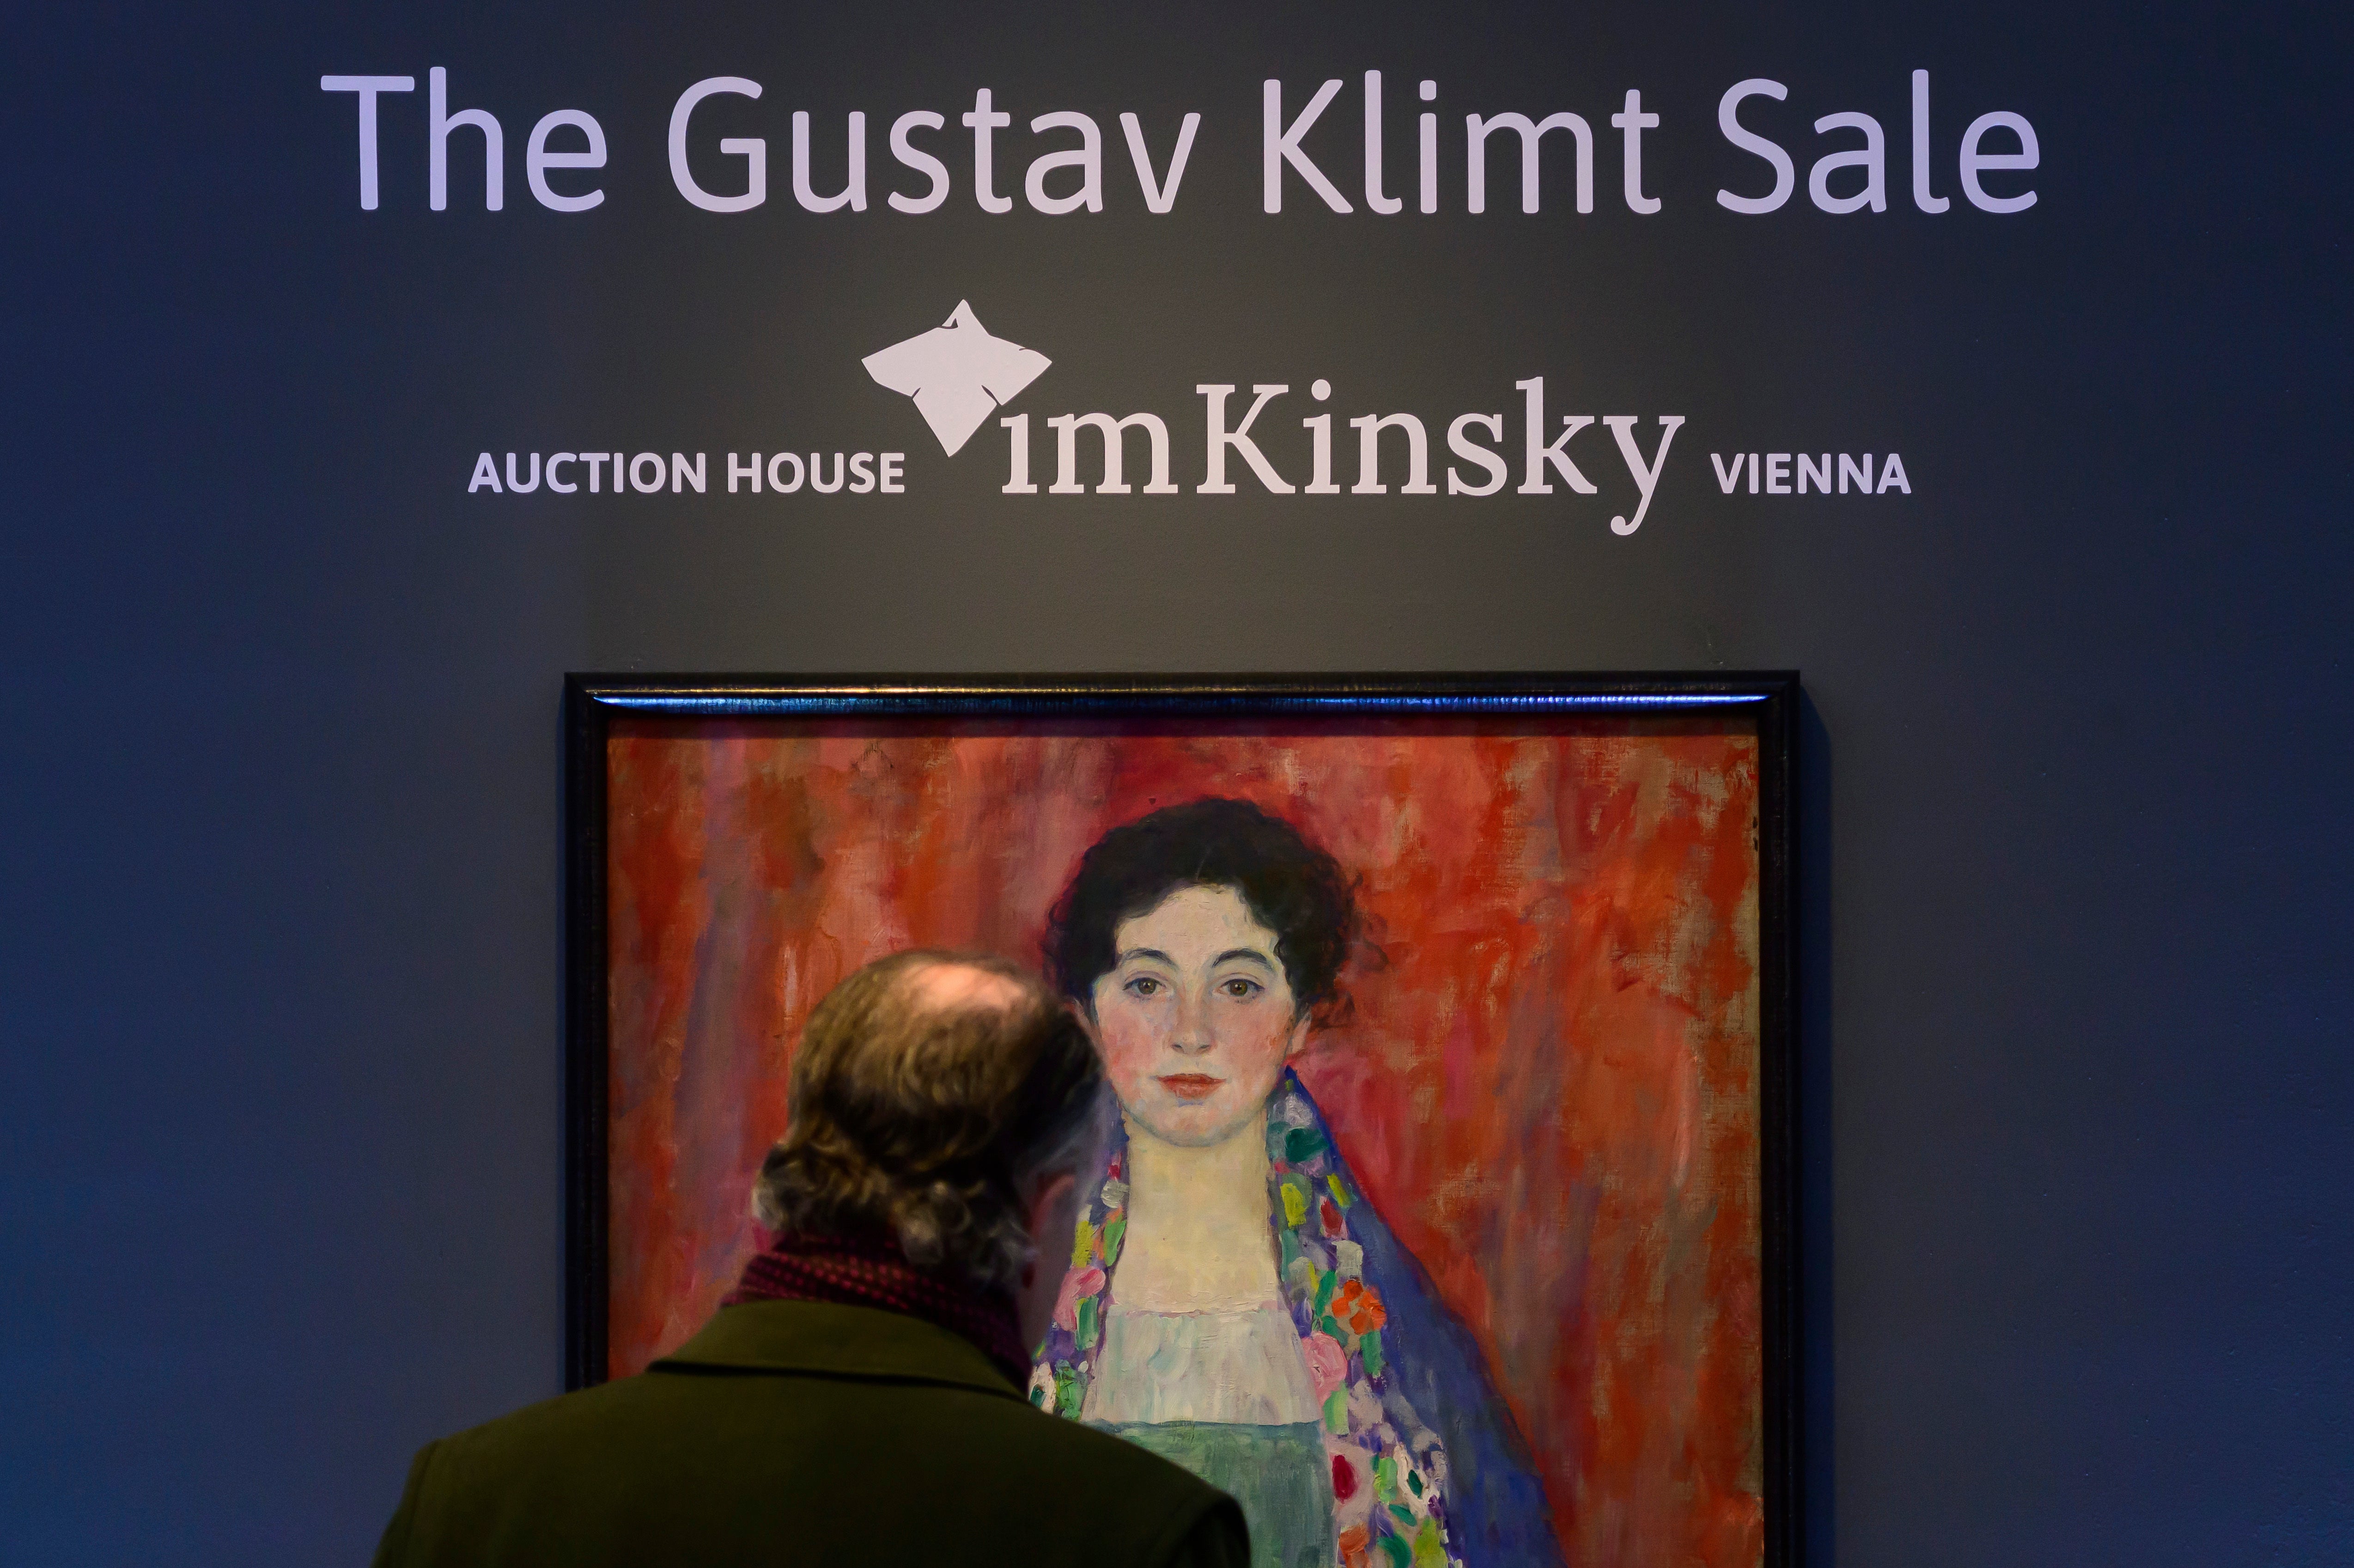 A portrait of a young woman by Gustav Klimt that was long believed to be lost has been sold at an auction in Vienna for 30 million euros ($32 million). The Austrian modernist artist started work on the “Portrait of Fräulein Lieser” in 1917, the year before he died, and it is one of his last works